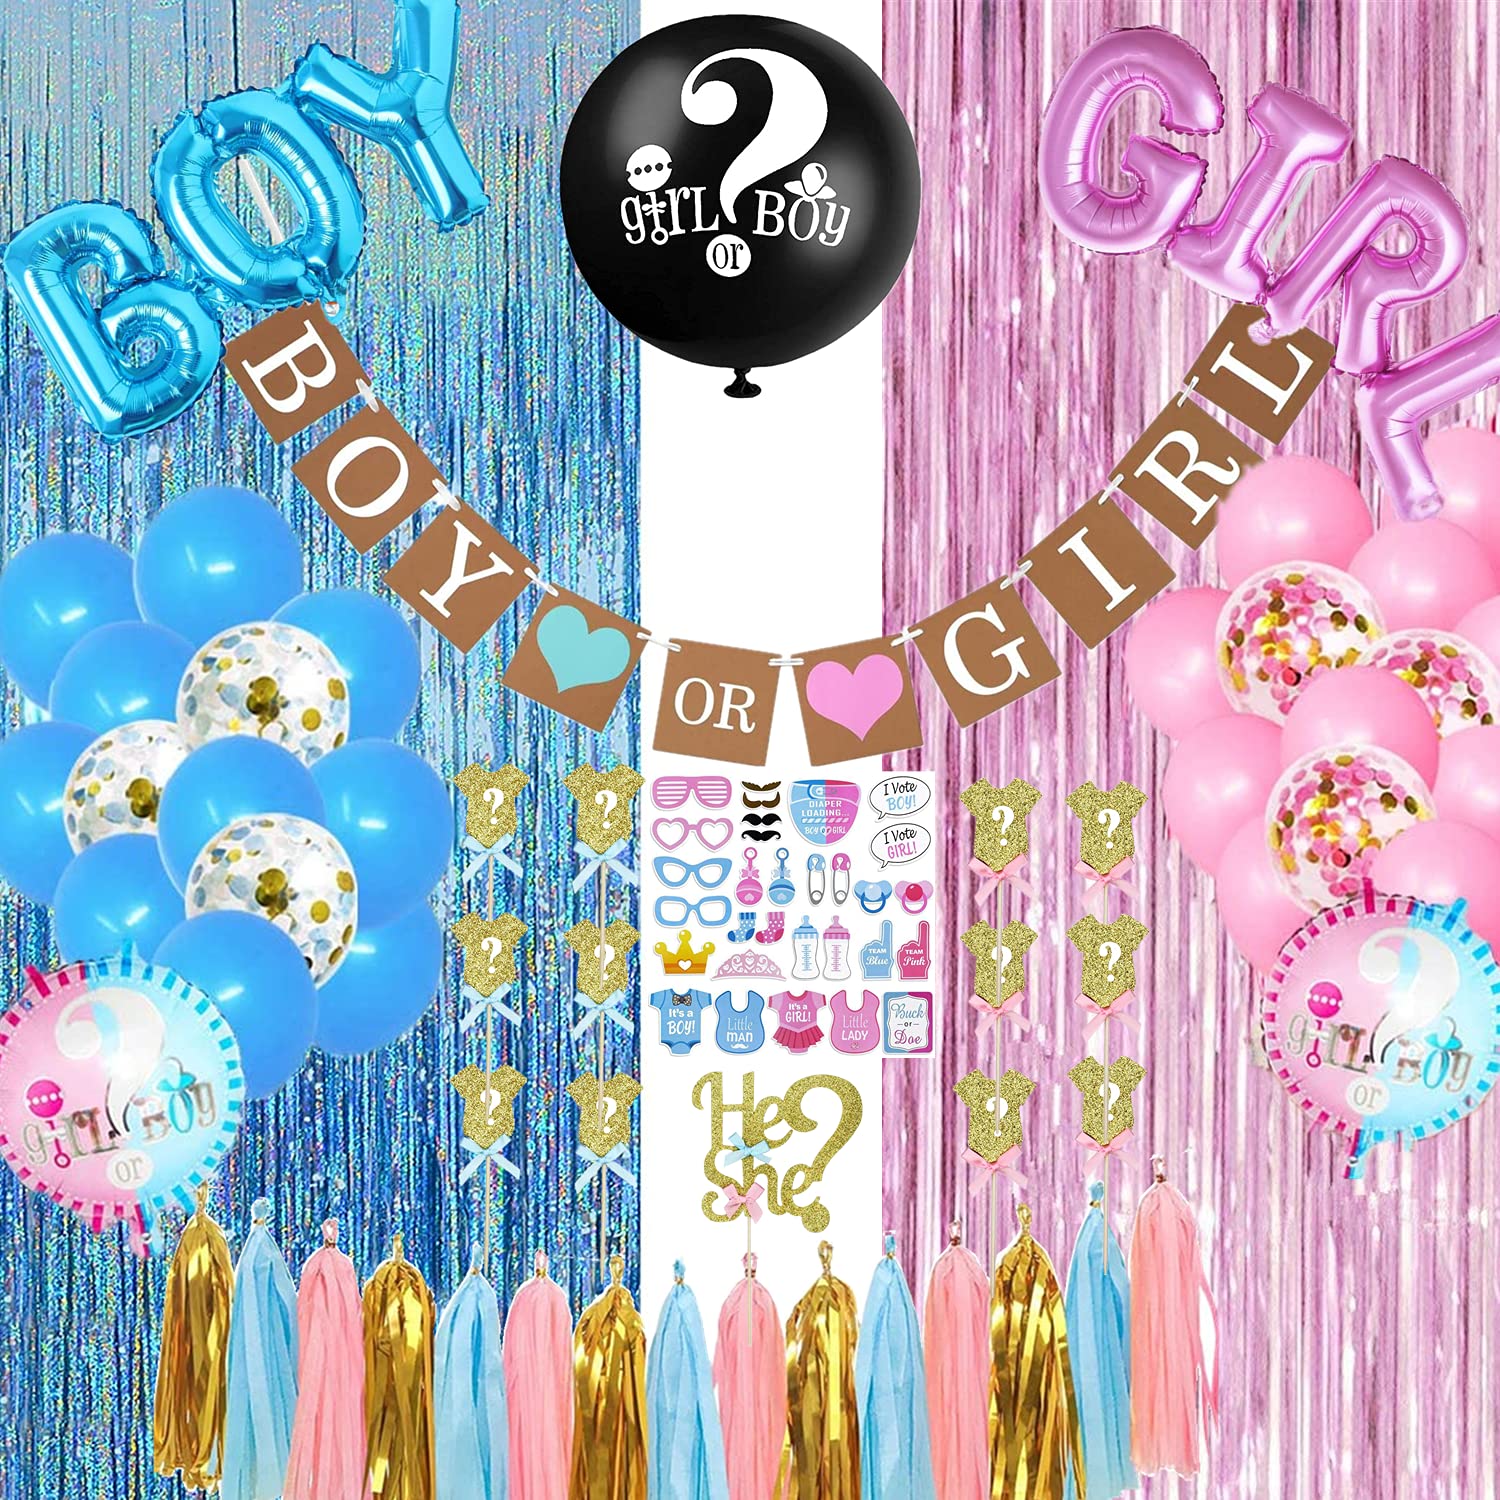 Gender Reveal Party Supplies,105 Pcs Gender Reveal Decorations, Boy or Girl Foil Balloons, Tablecloth, Photo Props, Toppers, Banner, Foil Curtains, Team Stickers, Ideas for Baby Shower